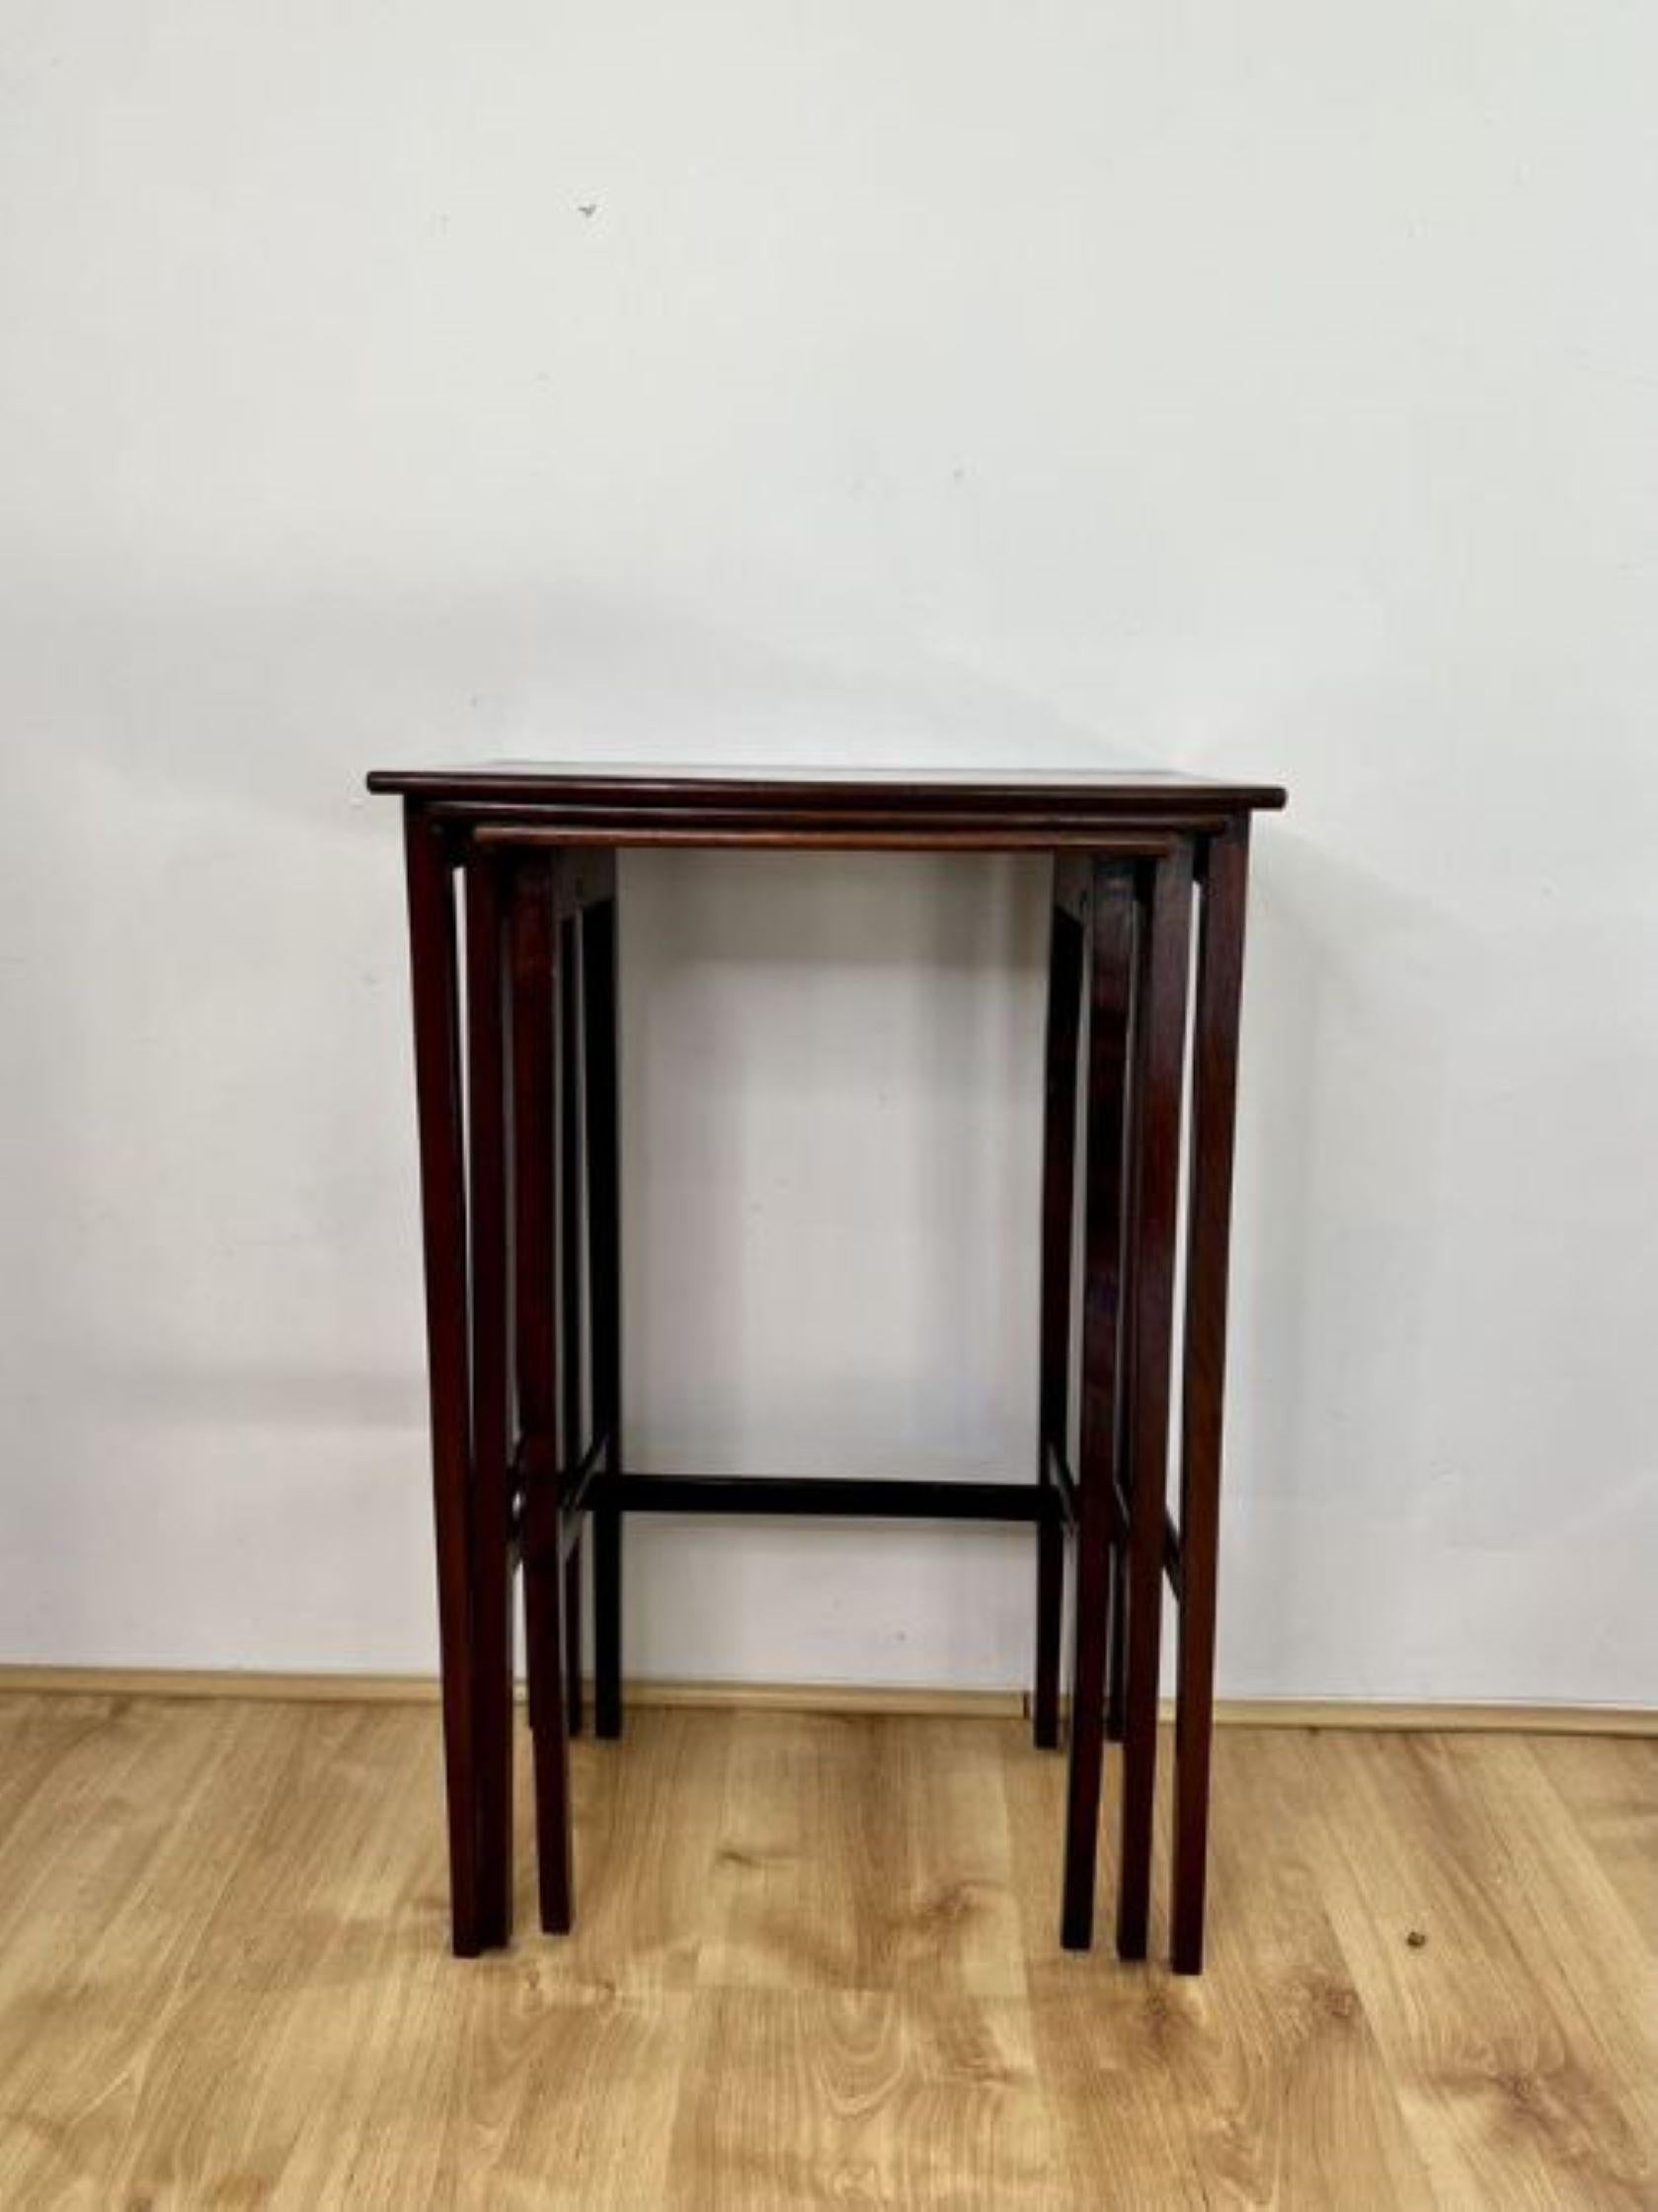 Nest of three antique Edwardian quality mahogany inlaid tables having a quality mahogany rectangular shaped top with inlaid satinwood, standing on elegant square tapering legs united by a stretcher.